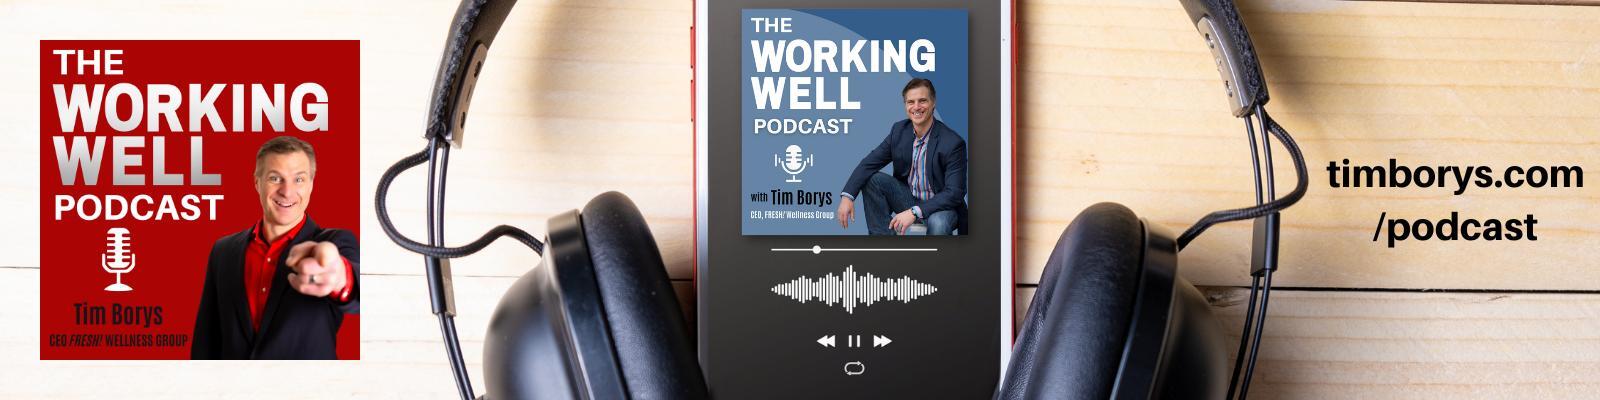 The Working Well Podcast